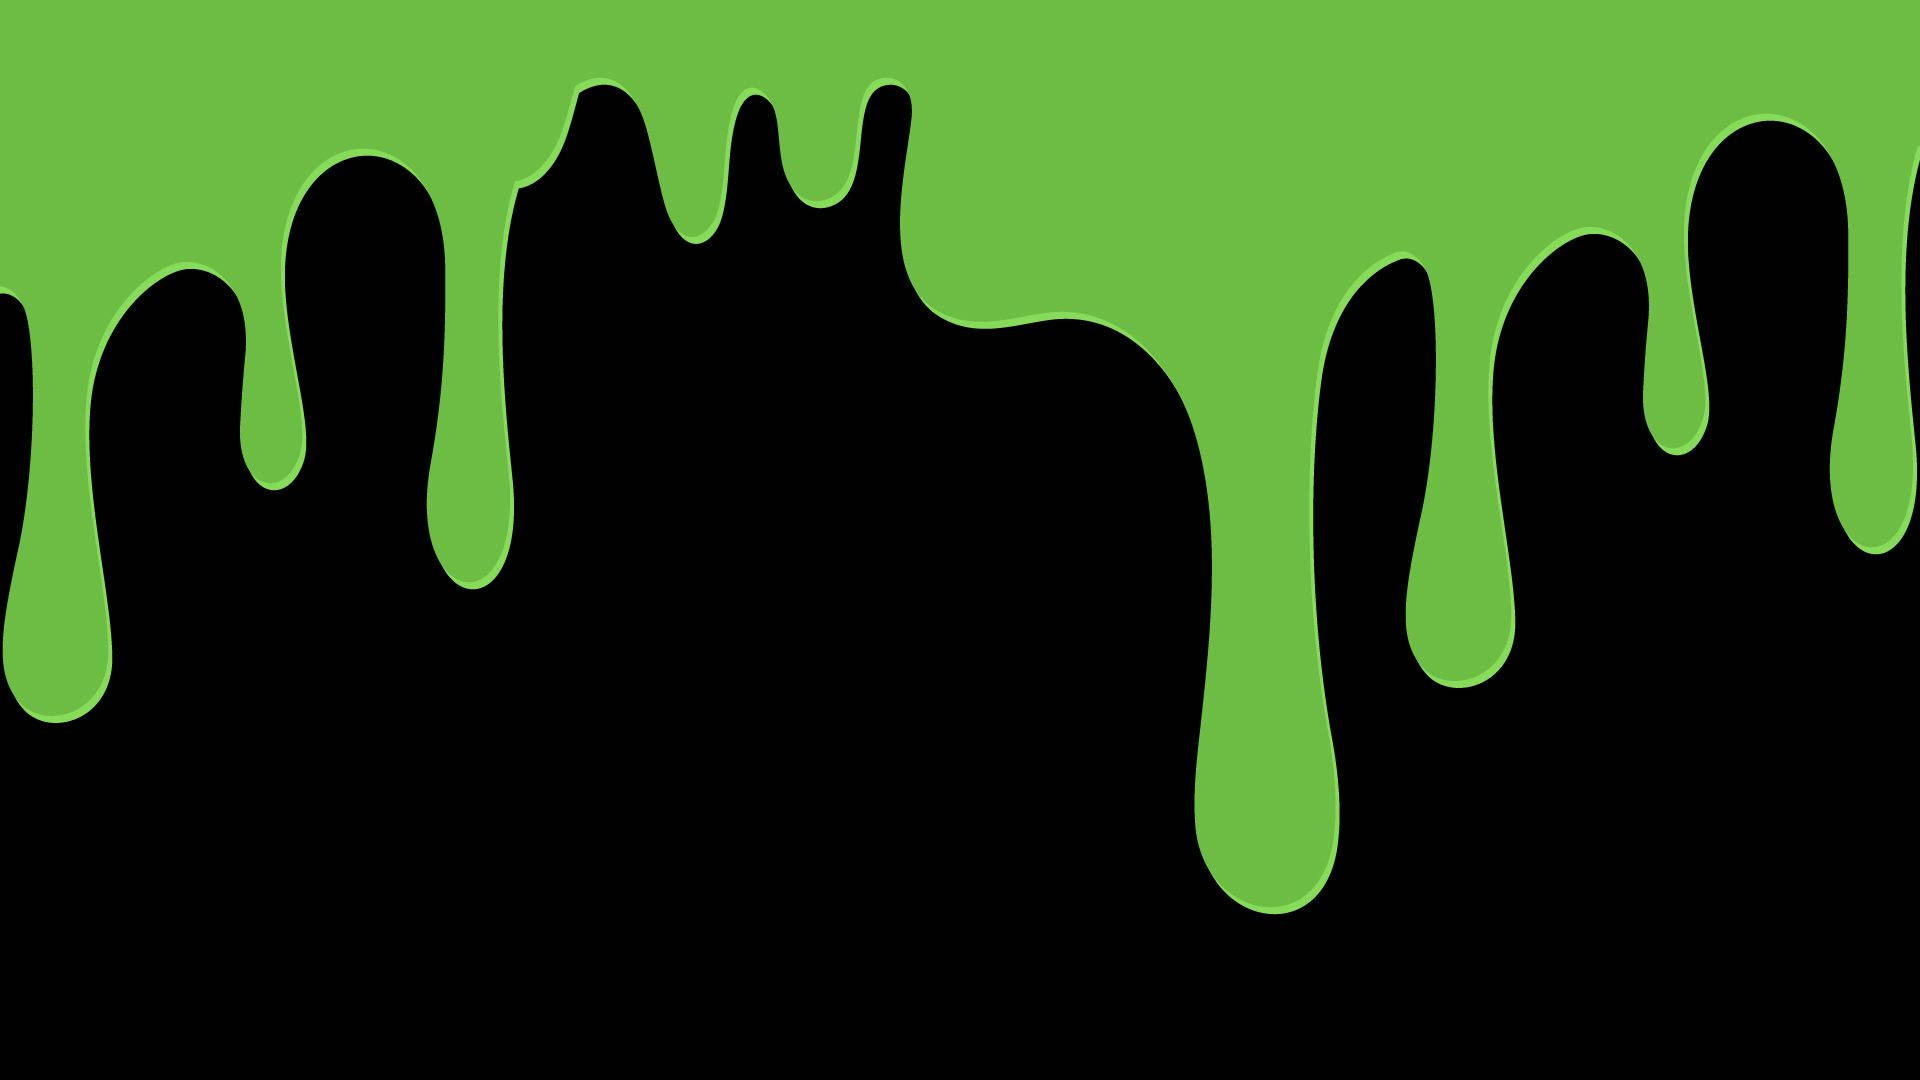 Drippy Aesthetic Green Slime Drip Background